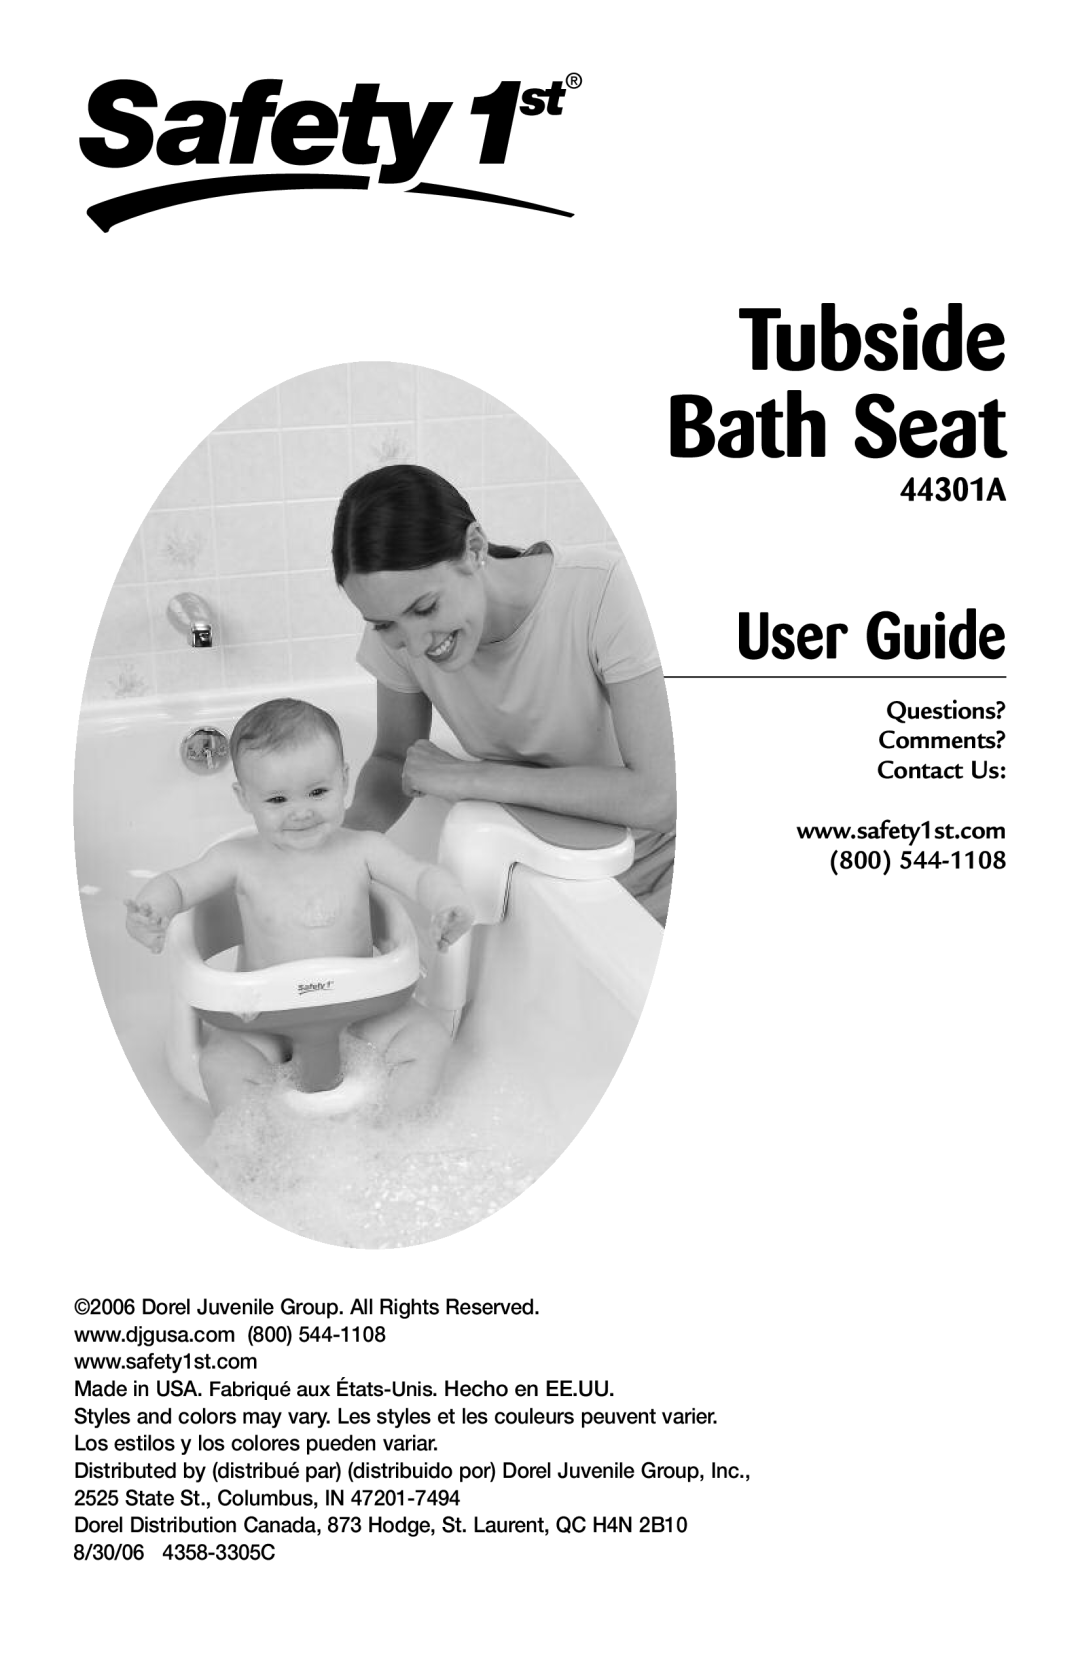 Safety 1st 44301A manual Tubside Bath Seat, User Guide, Questions? Comments? Contact Us 